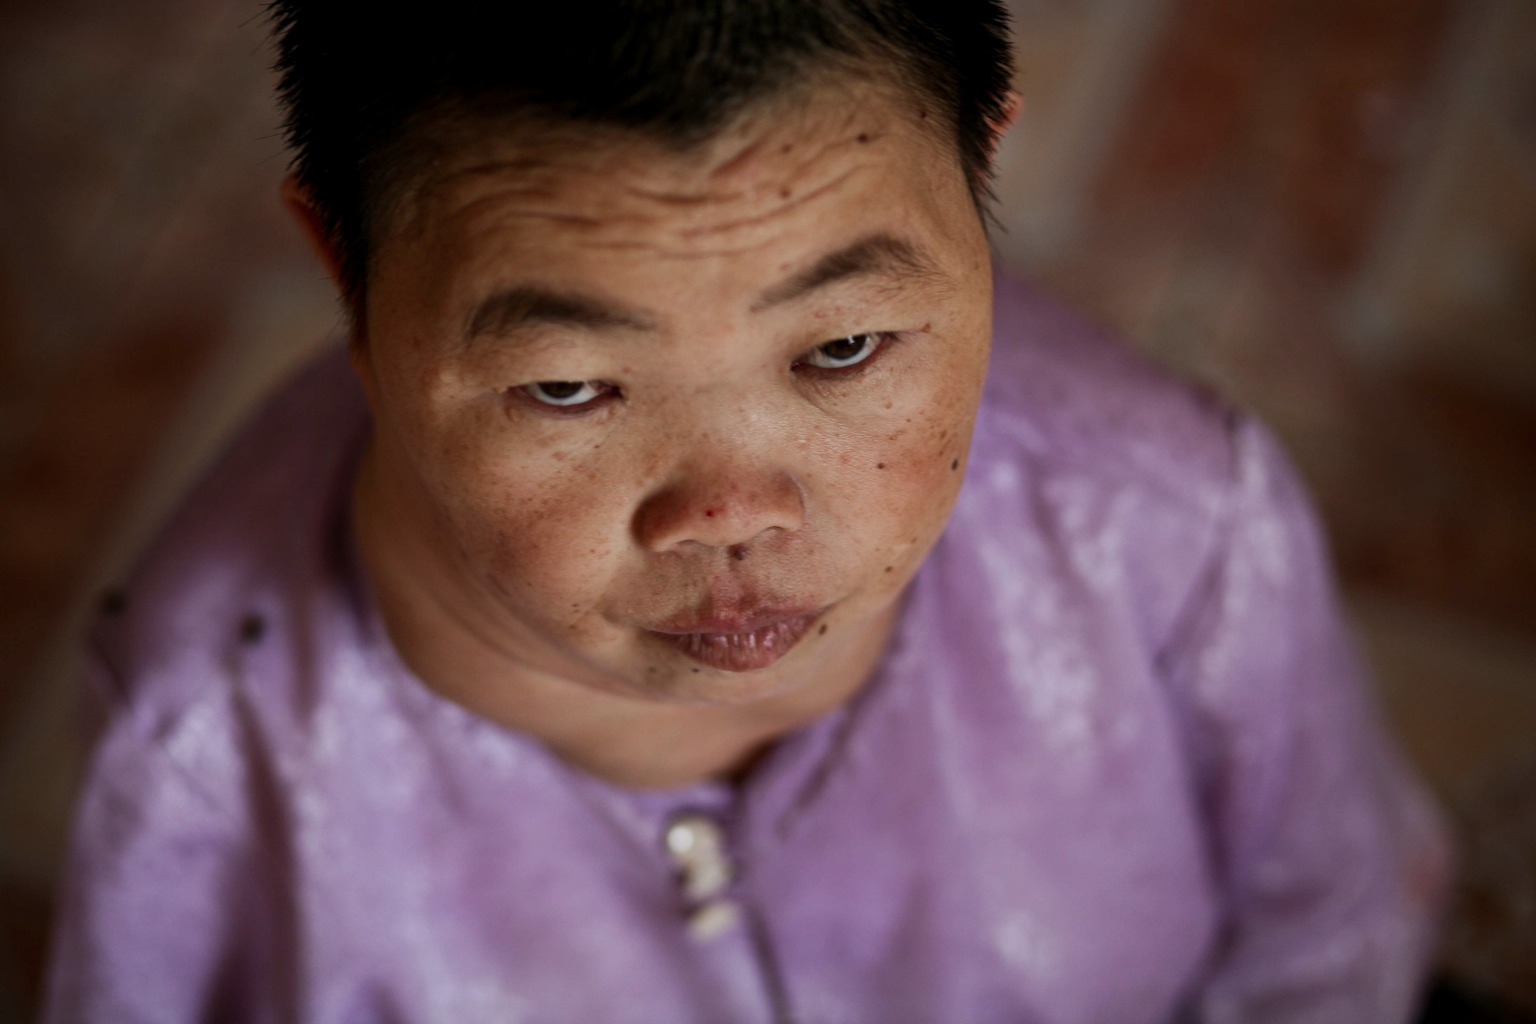 Agent Orange Victim, Thom Le Pham, gives a look of despair at home in the Benh Vien district, Vietnam.